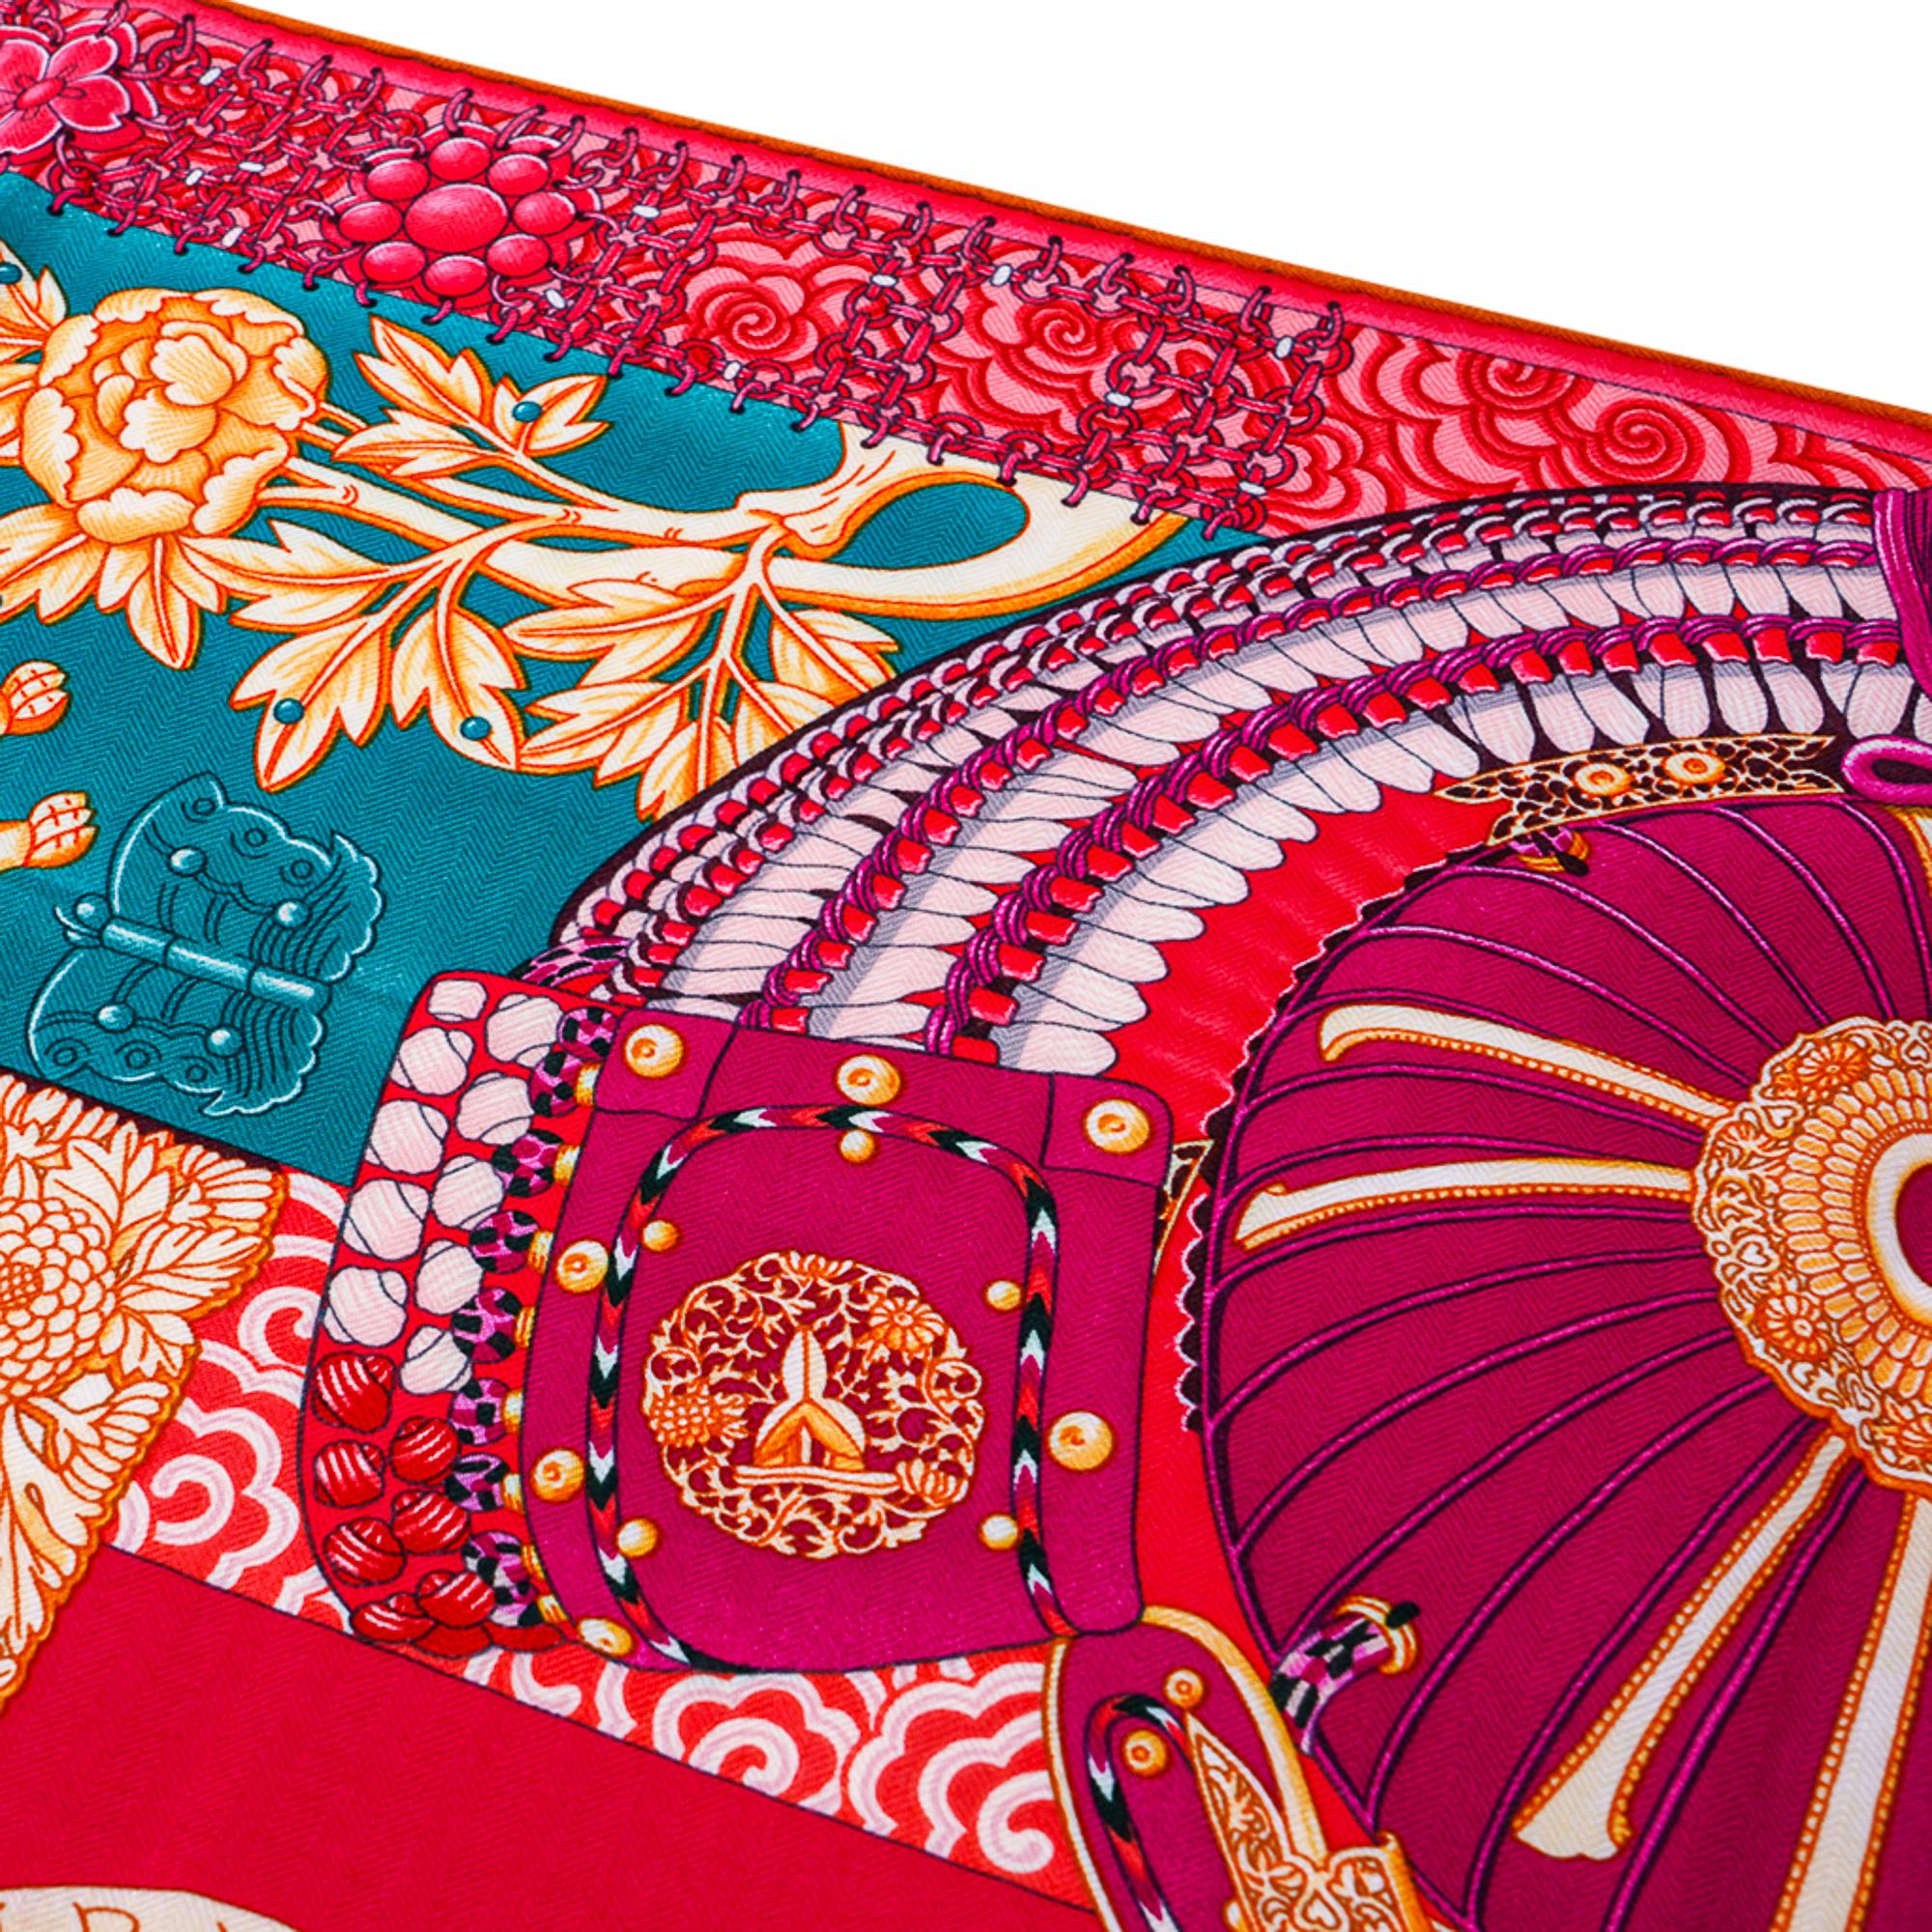 Guaranteed authentic Hermes Cashmere Silk 140 cm GM shawl Parures de Samouraïs.
Exquisite composition designed by Aline Honore features a suit of armour and floral motifs.
Vivid tones in vert, corail, and rose indien.
The samurai warriors of